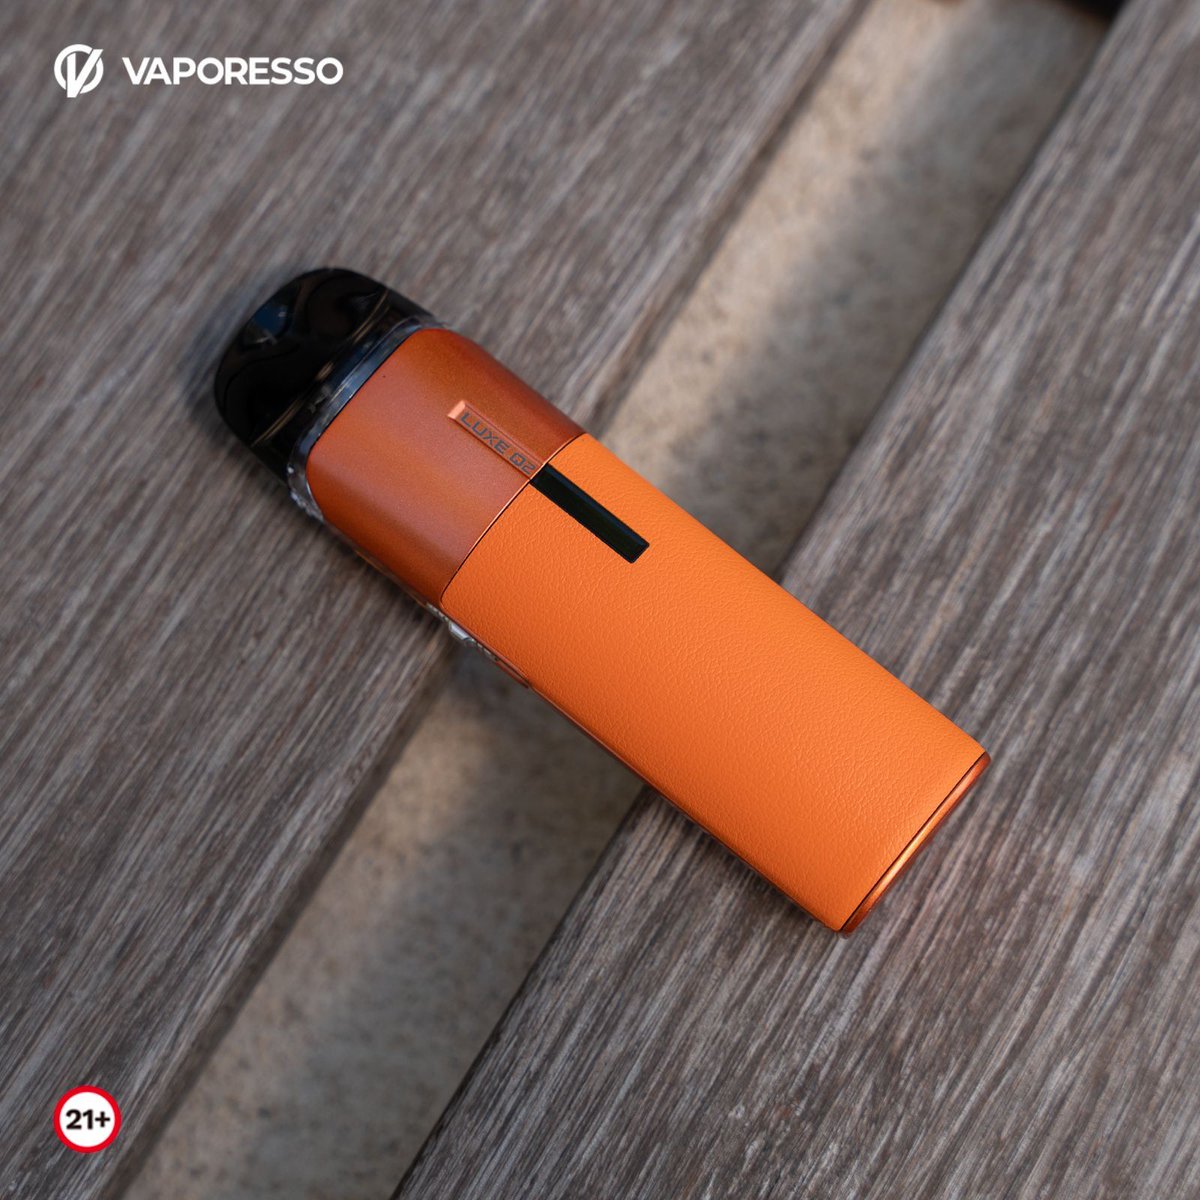 🌈🌈
🆕🟠Having a good time with #luxeq2 in orange, how about you?

🔥❗️Weekly sale - 17% off: WSHC
✔️Built-in 1000mAh battery
✔️3ml pod capacity
🙋4 colors available now🧡💚🖤🔘
..
💃Get yours:👇
bit.ly/3T7yWzy
>
#vaporesso #luxeq2pod #vaporessoluxeq2 #vapewholesale